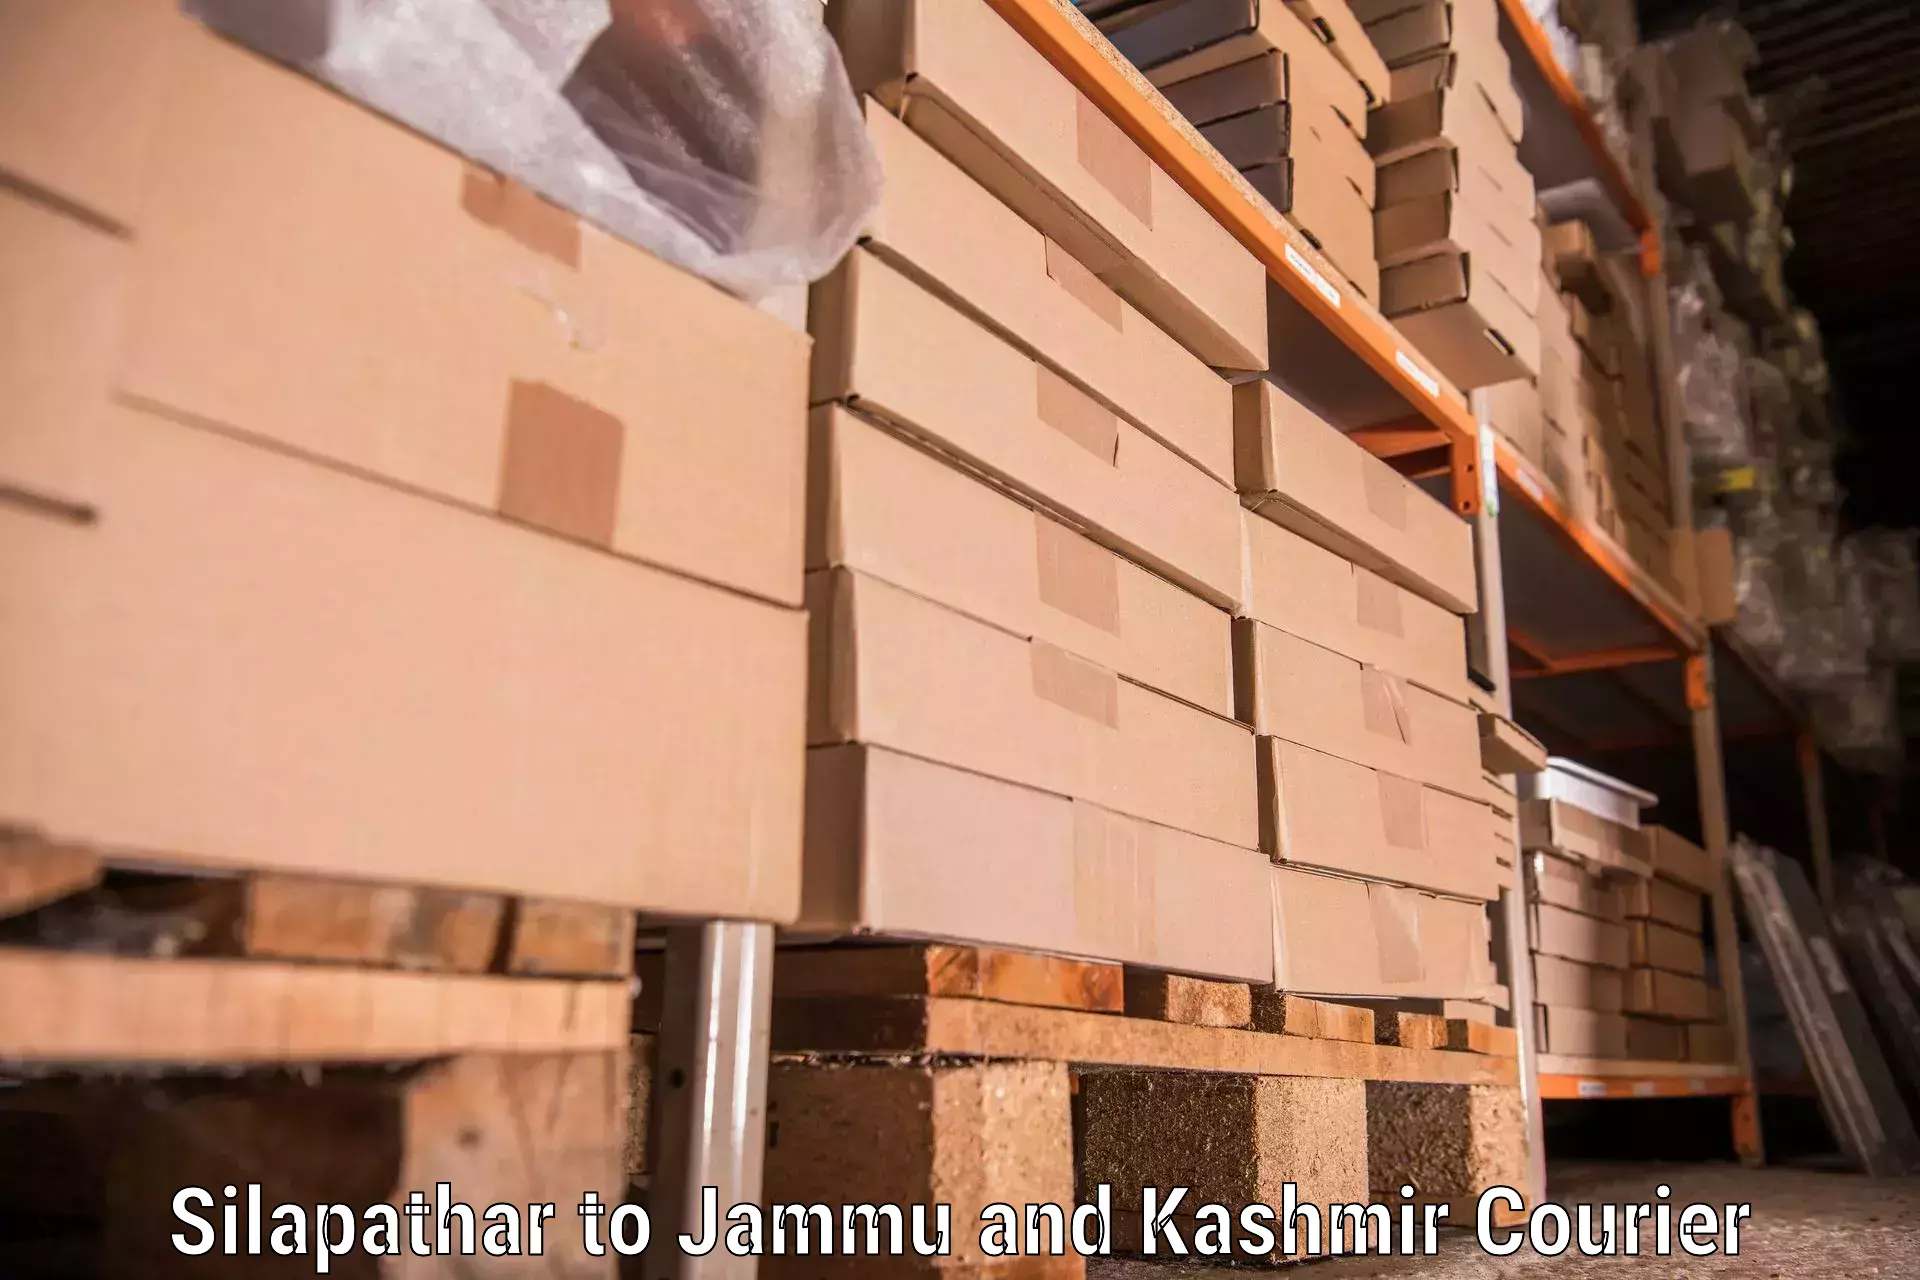 Trusted relocation experts Silapathar to Baramulla